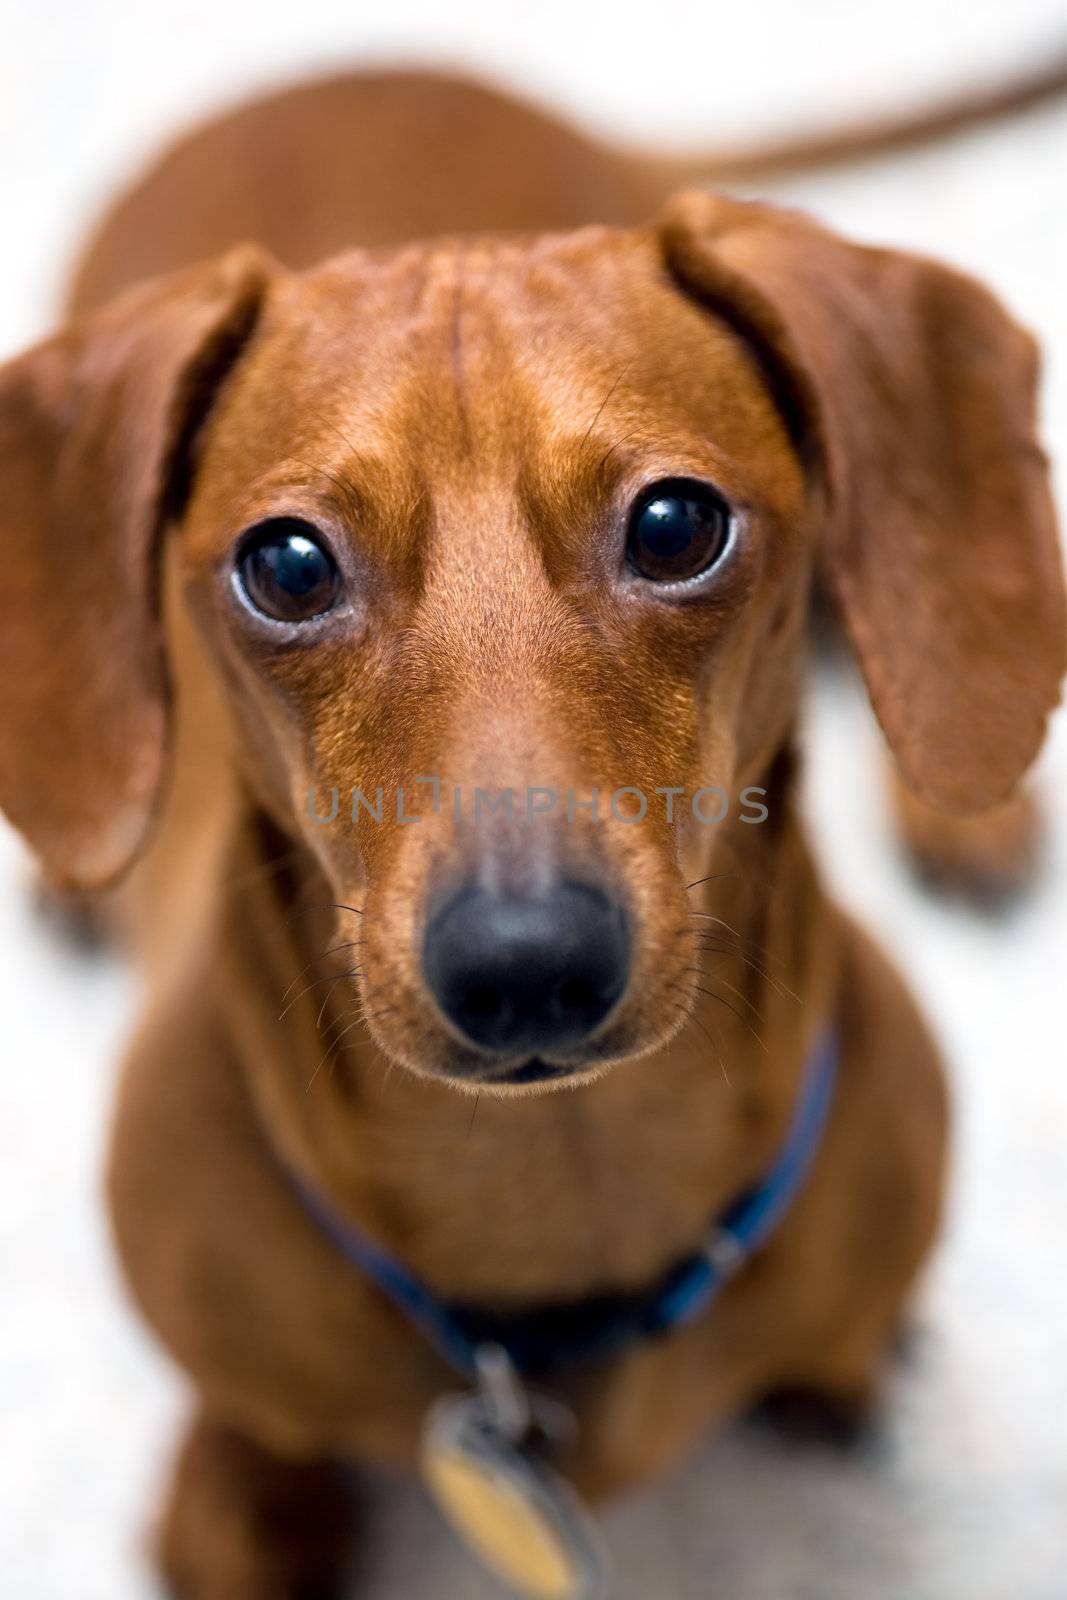 Dachshund look of worry looking at camera by woodygraphs